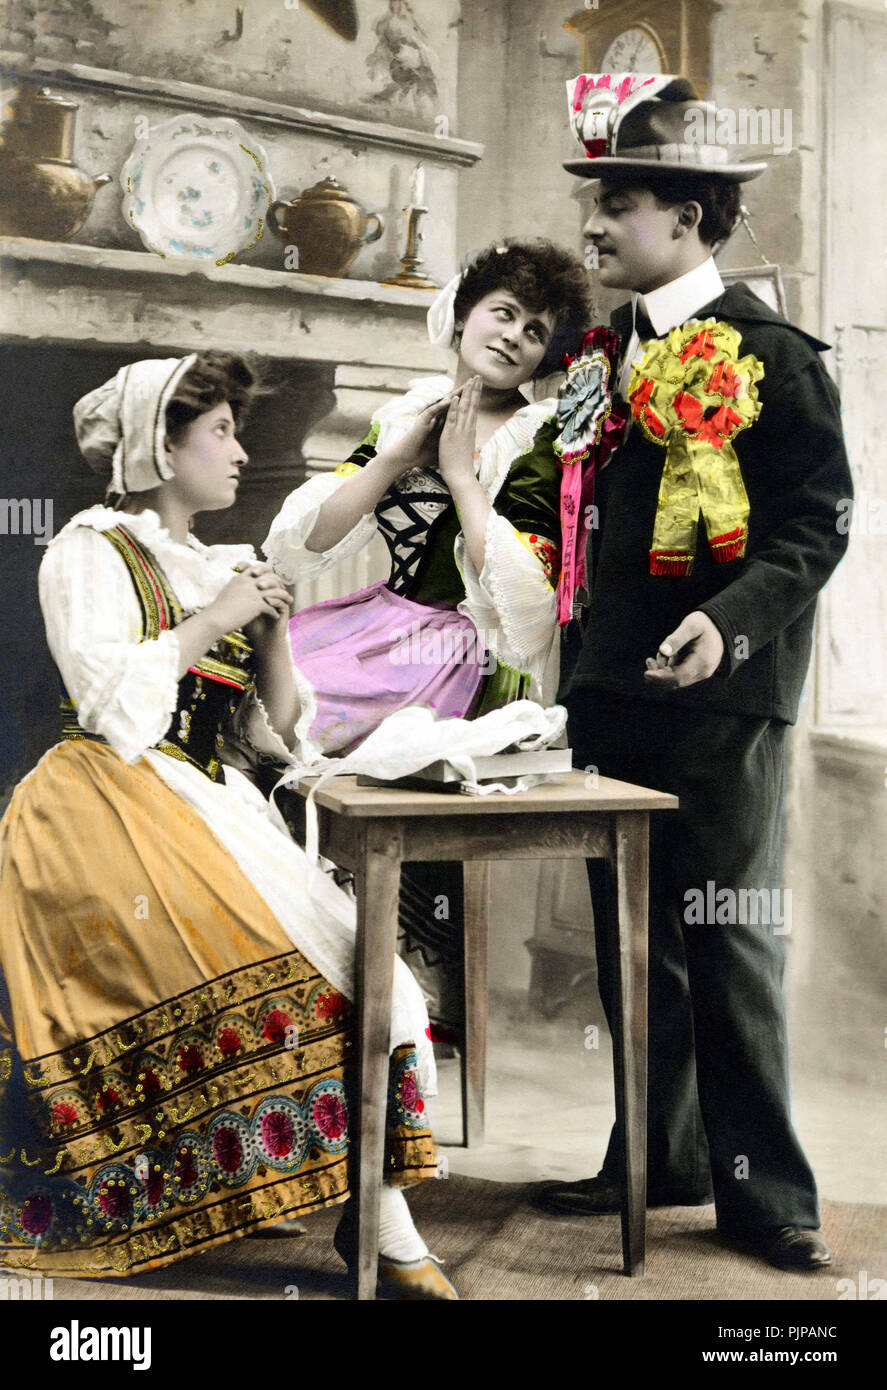 Flirt, one man, two admirers, 1920s, Germany Stock Photo